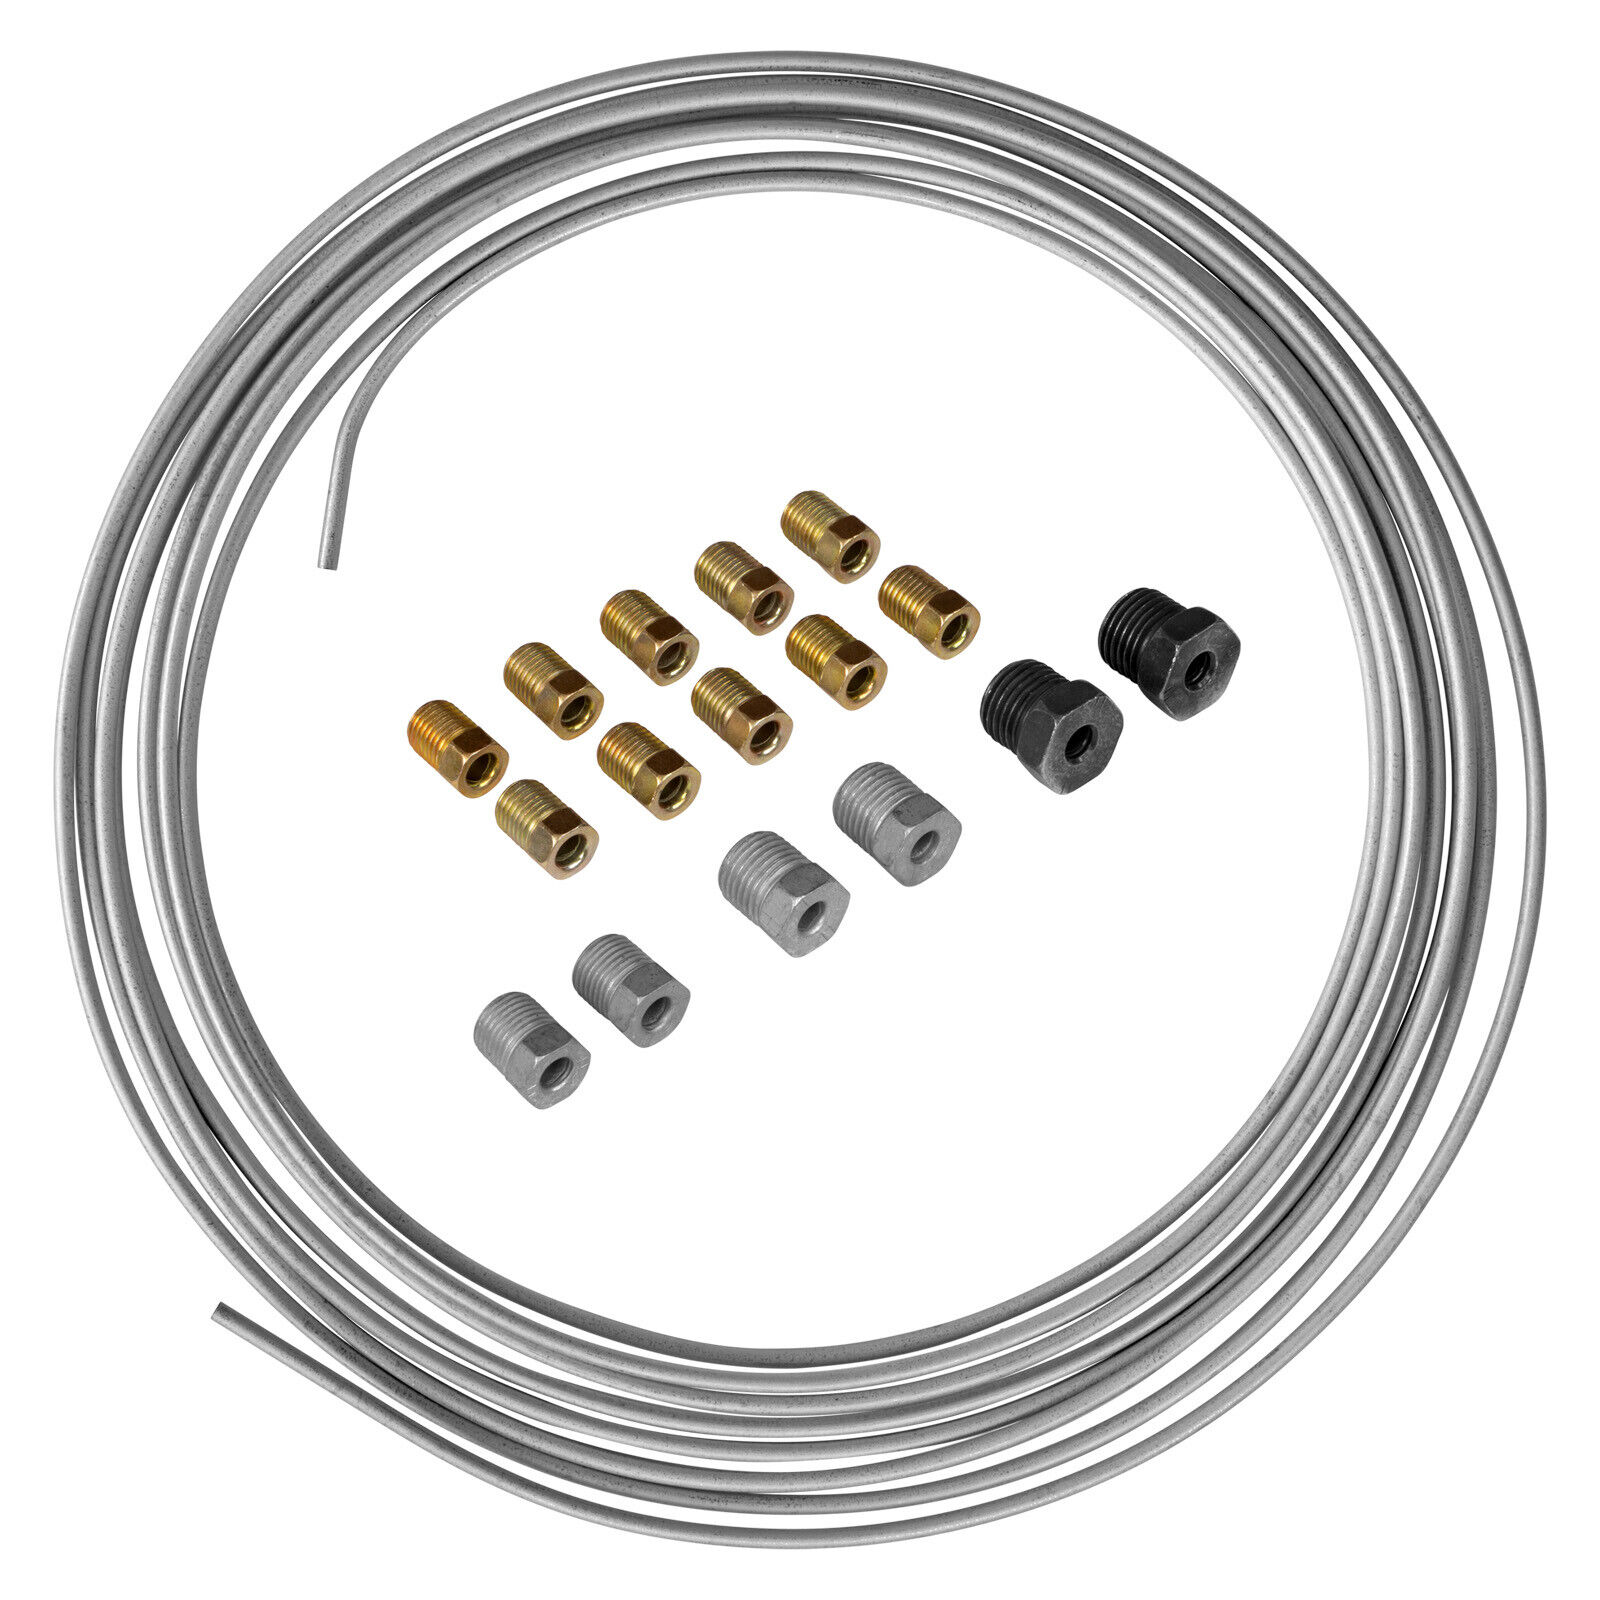 3/16 OD 25 ft Steel Brake Line Tubing Coil and Fitting Kit - 16 Fittings - SAE